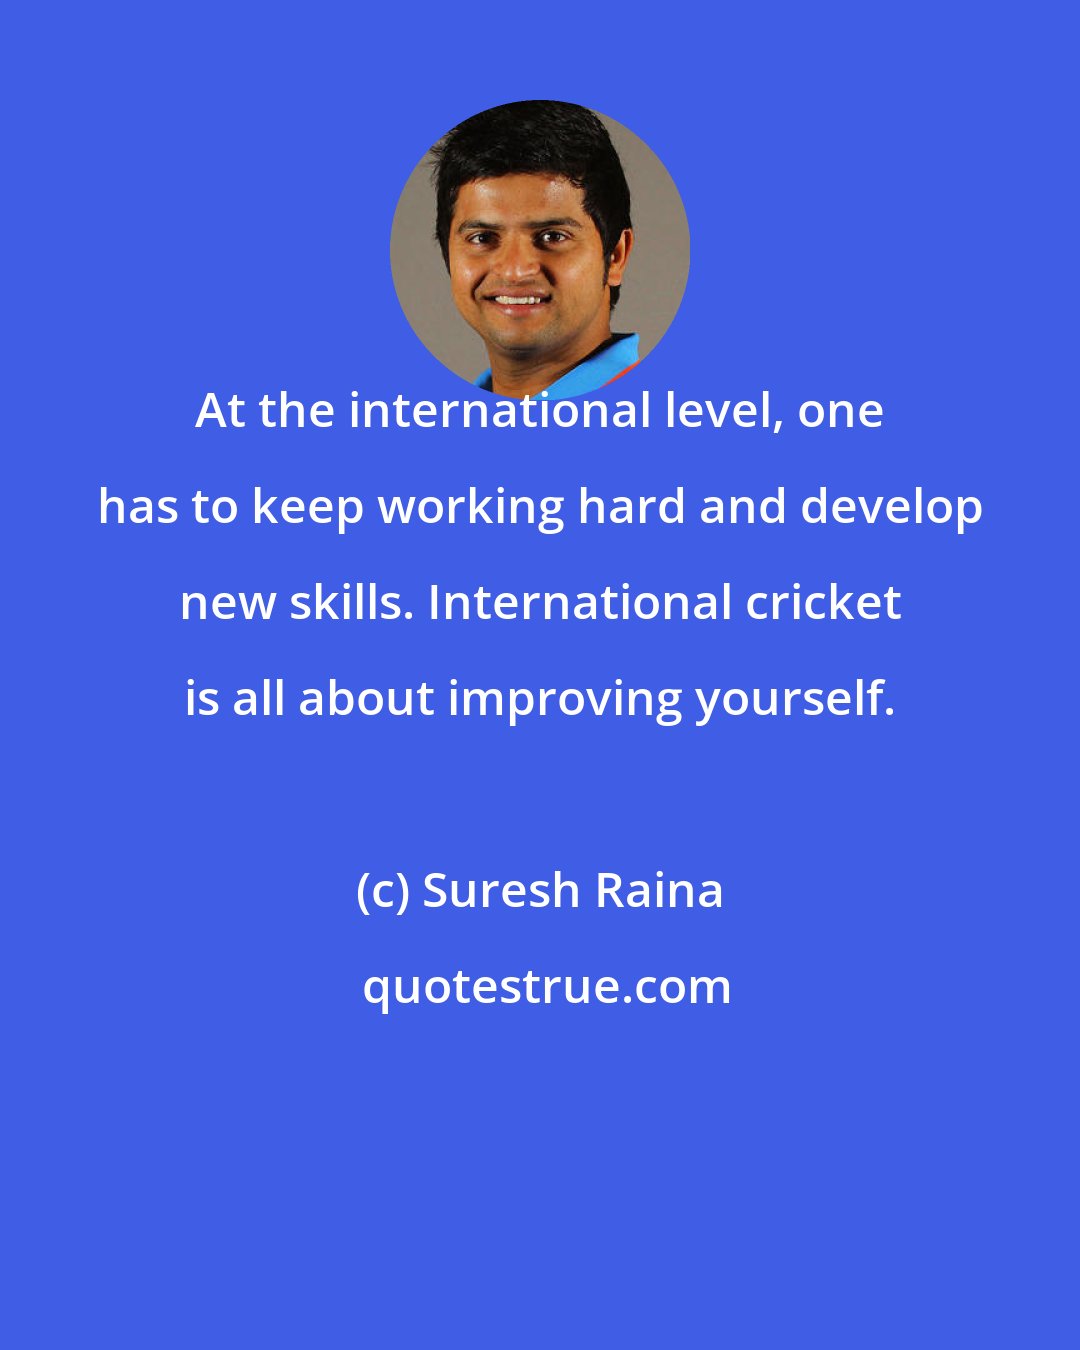 Suresh Raina: At the international level, one has to keep working hard and develop new skills. International cricket is all about improving yourself.